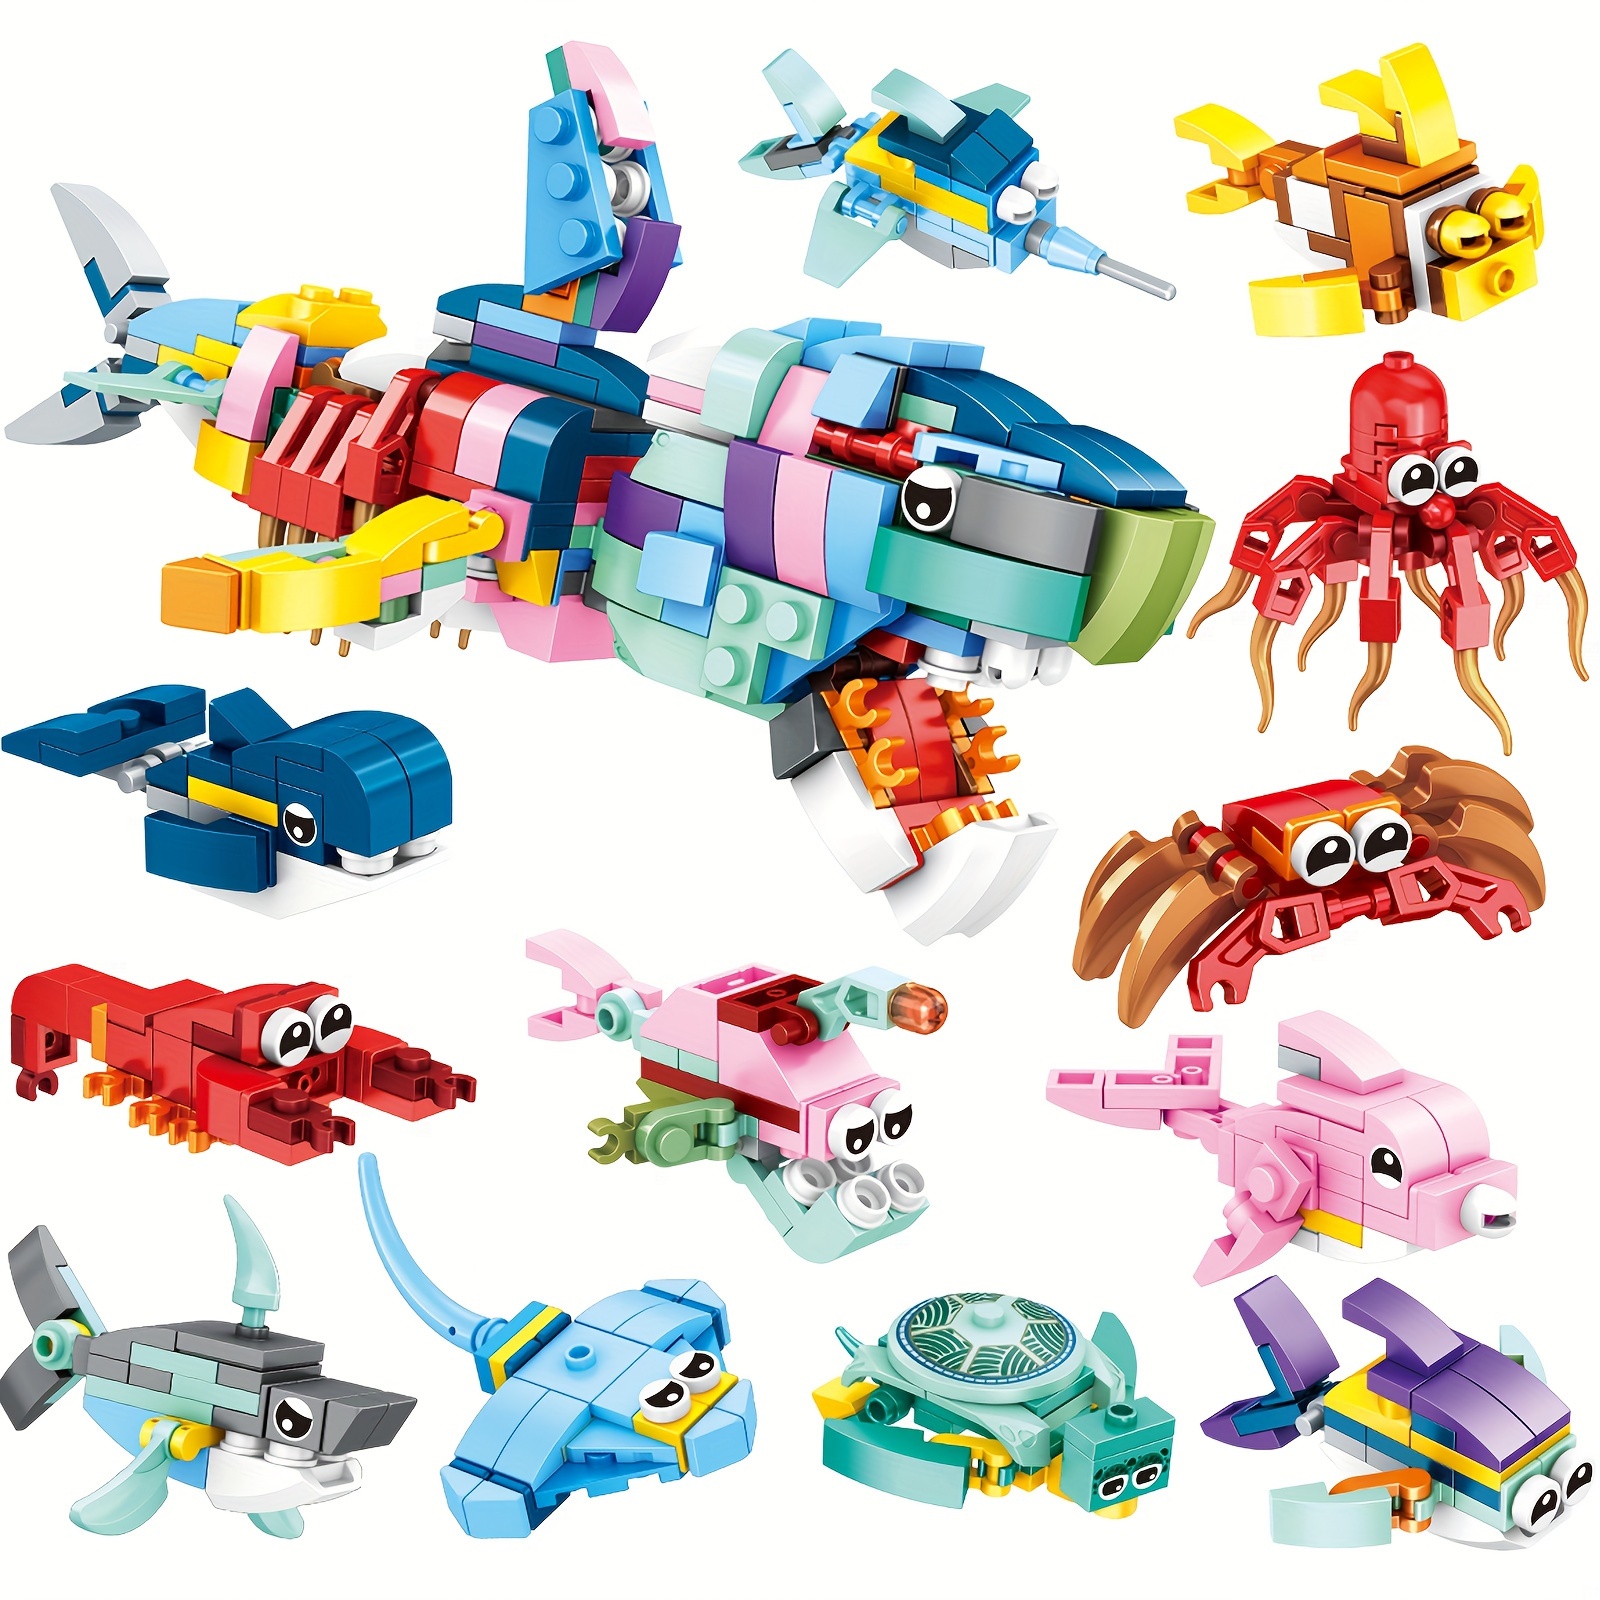 

Ocean Animal Building Blocks Set: 12 Playful Creatures Or A Giant Shark, Suitable For Ages 6-8, Abs Material